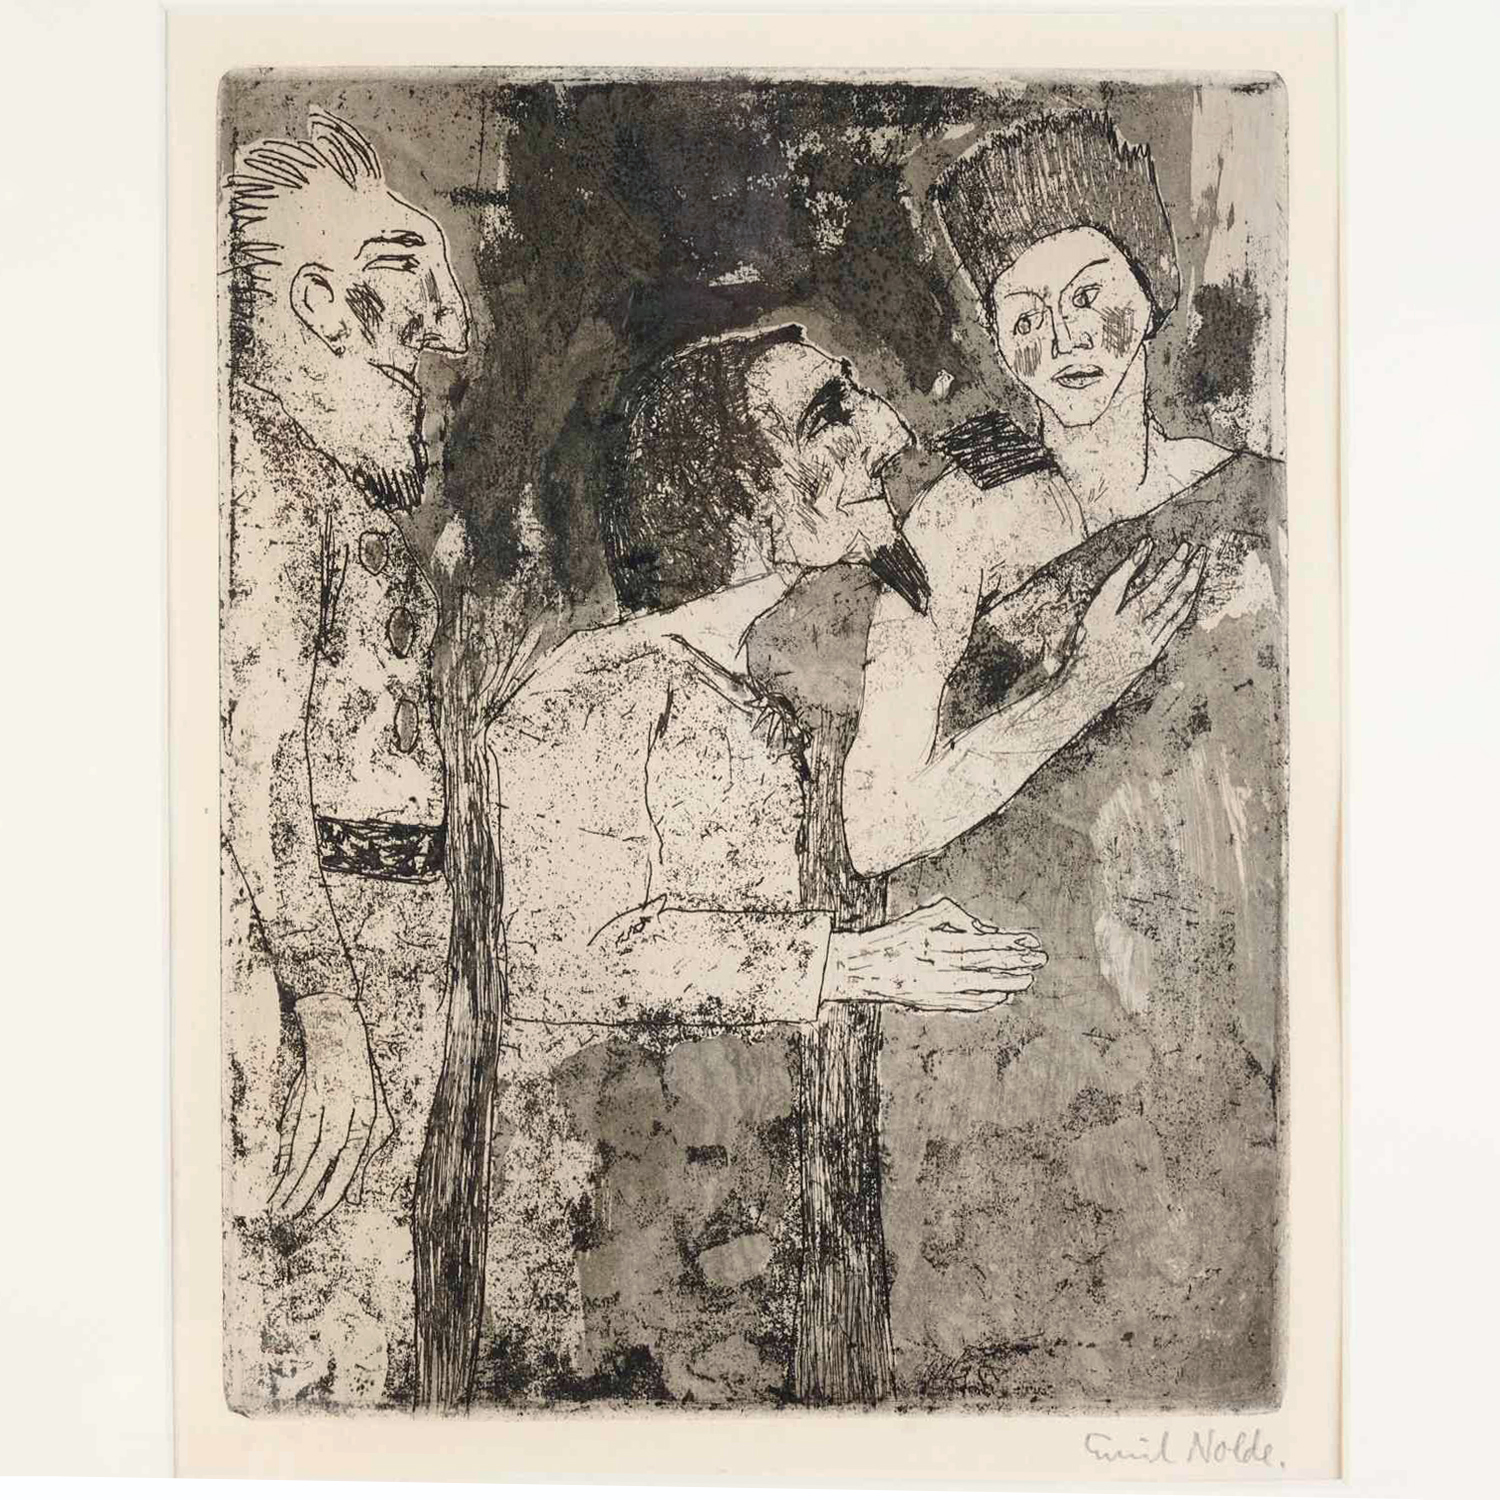 EMIL NOLDE DRYPOINT ETCHING 1918 2ce403